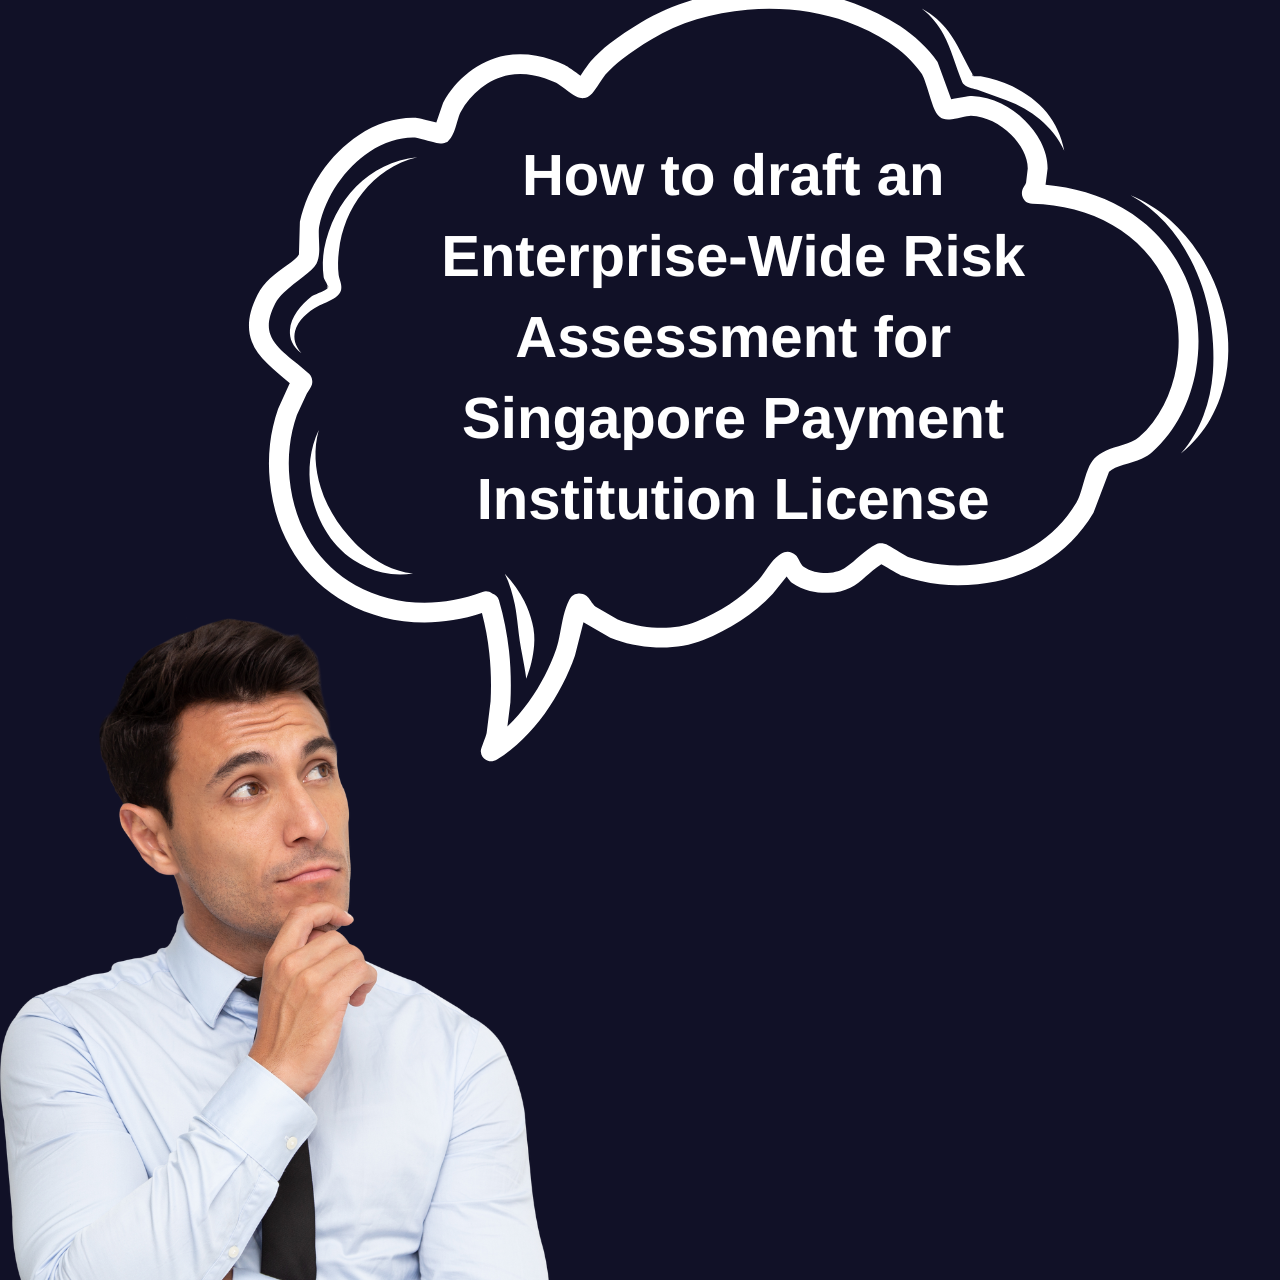 https://x5v6w2n8.rocketcdn.me/wp-content/uploads/2022/09/How-to-draft-an-Enterprise-Wide-Risk-Assessment-for-Singapore-Payment-Institution-License.png